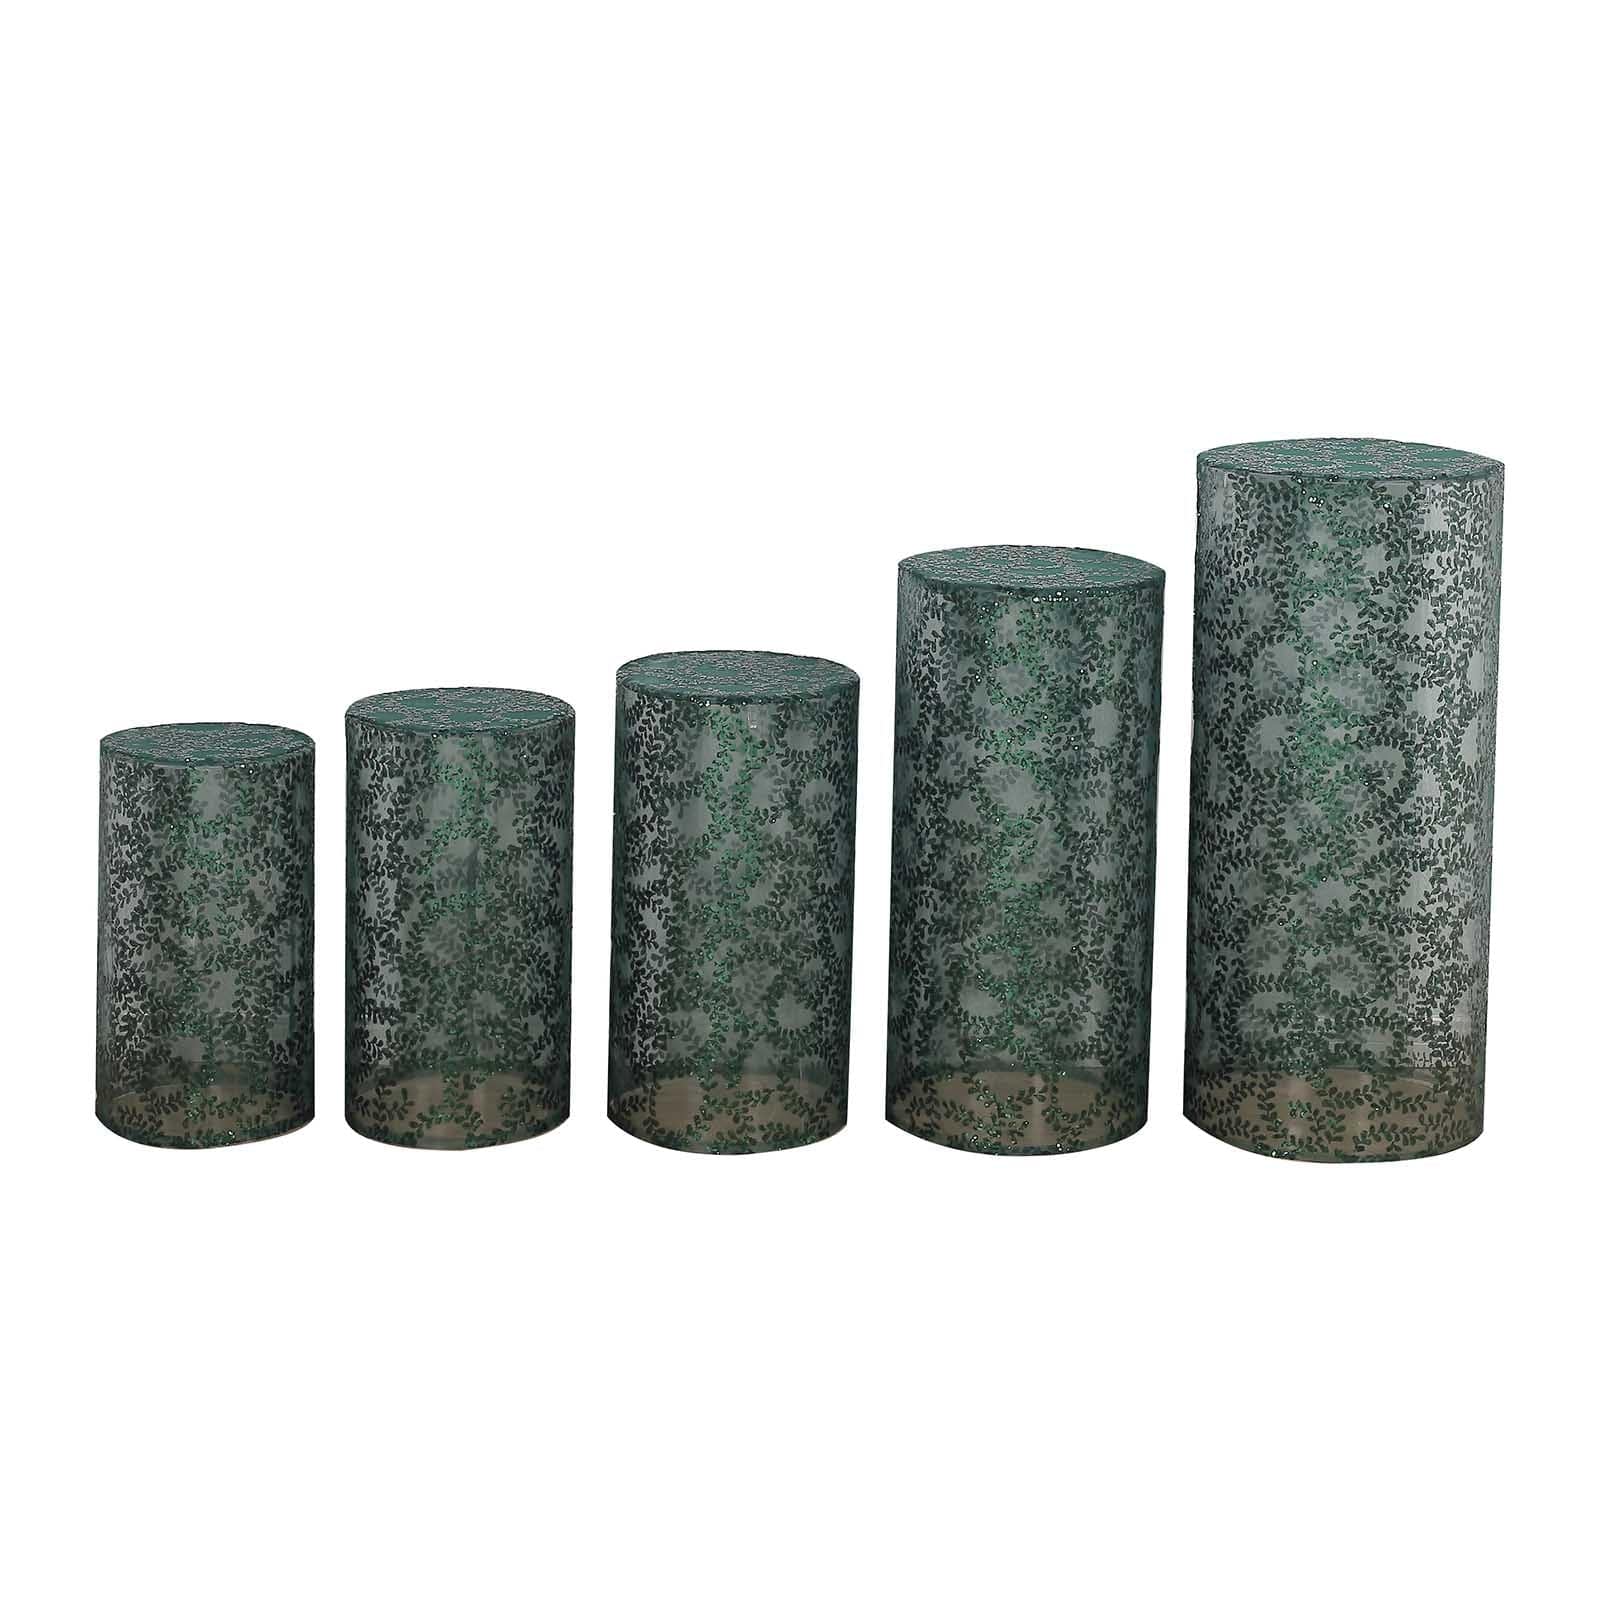 5 Sequin Mesh Cylinder Display Box Stand Covers with Leaf Vine Embroidery PROP_BOX_006_02_FLOR_HUNT